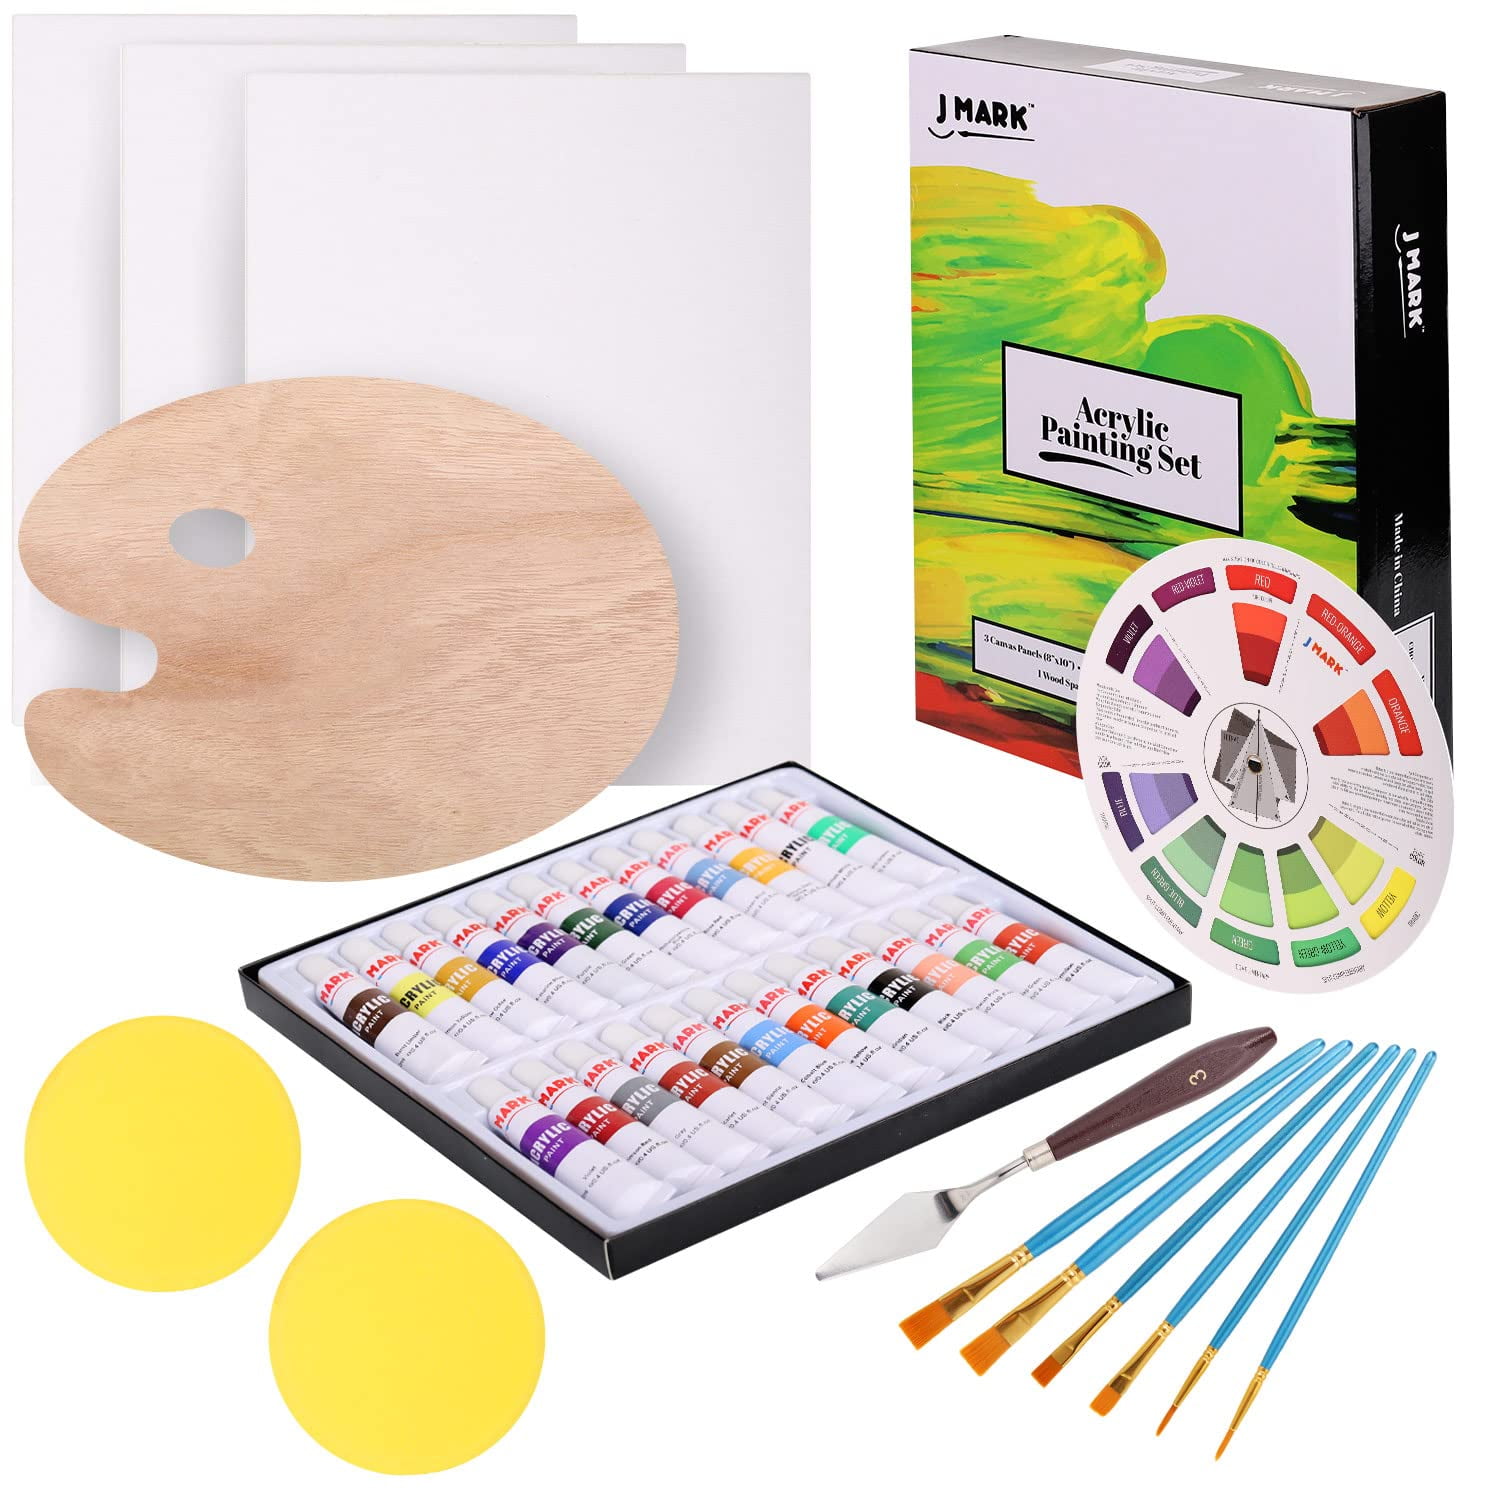 Painting Kit for Adults - 38 Piece Set Includes 24 Acrylic Paints, 3  Canvas, 6 Brushes, Wood Palette, Color Wheel, Spatula - Art Supplies for